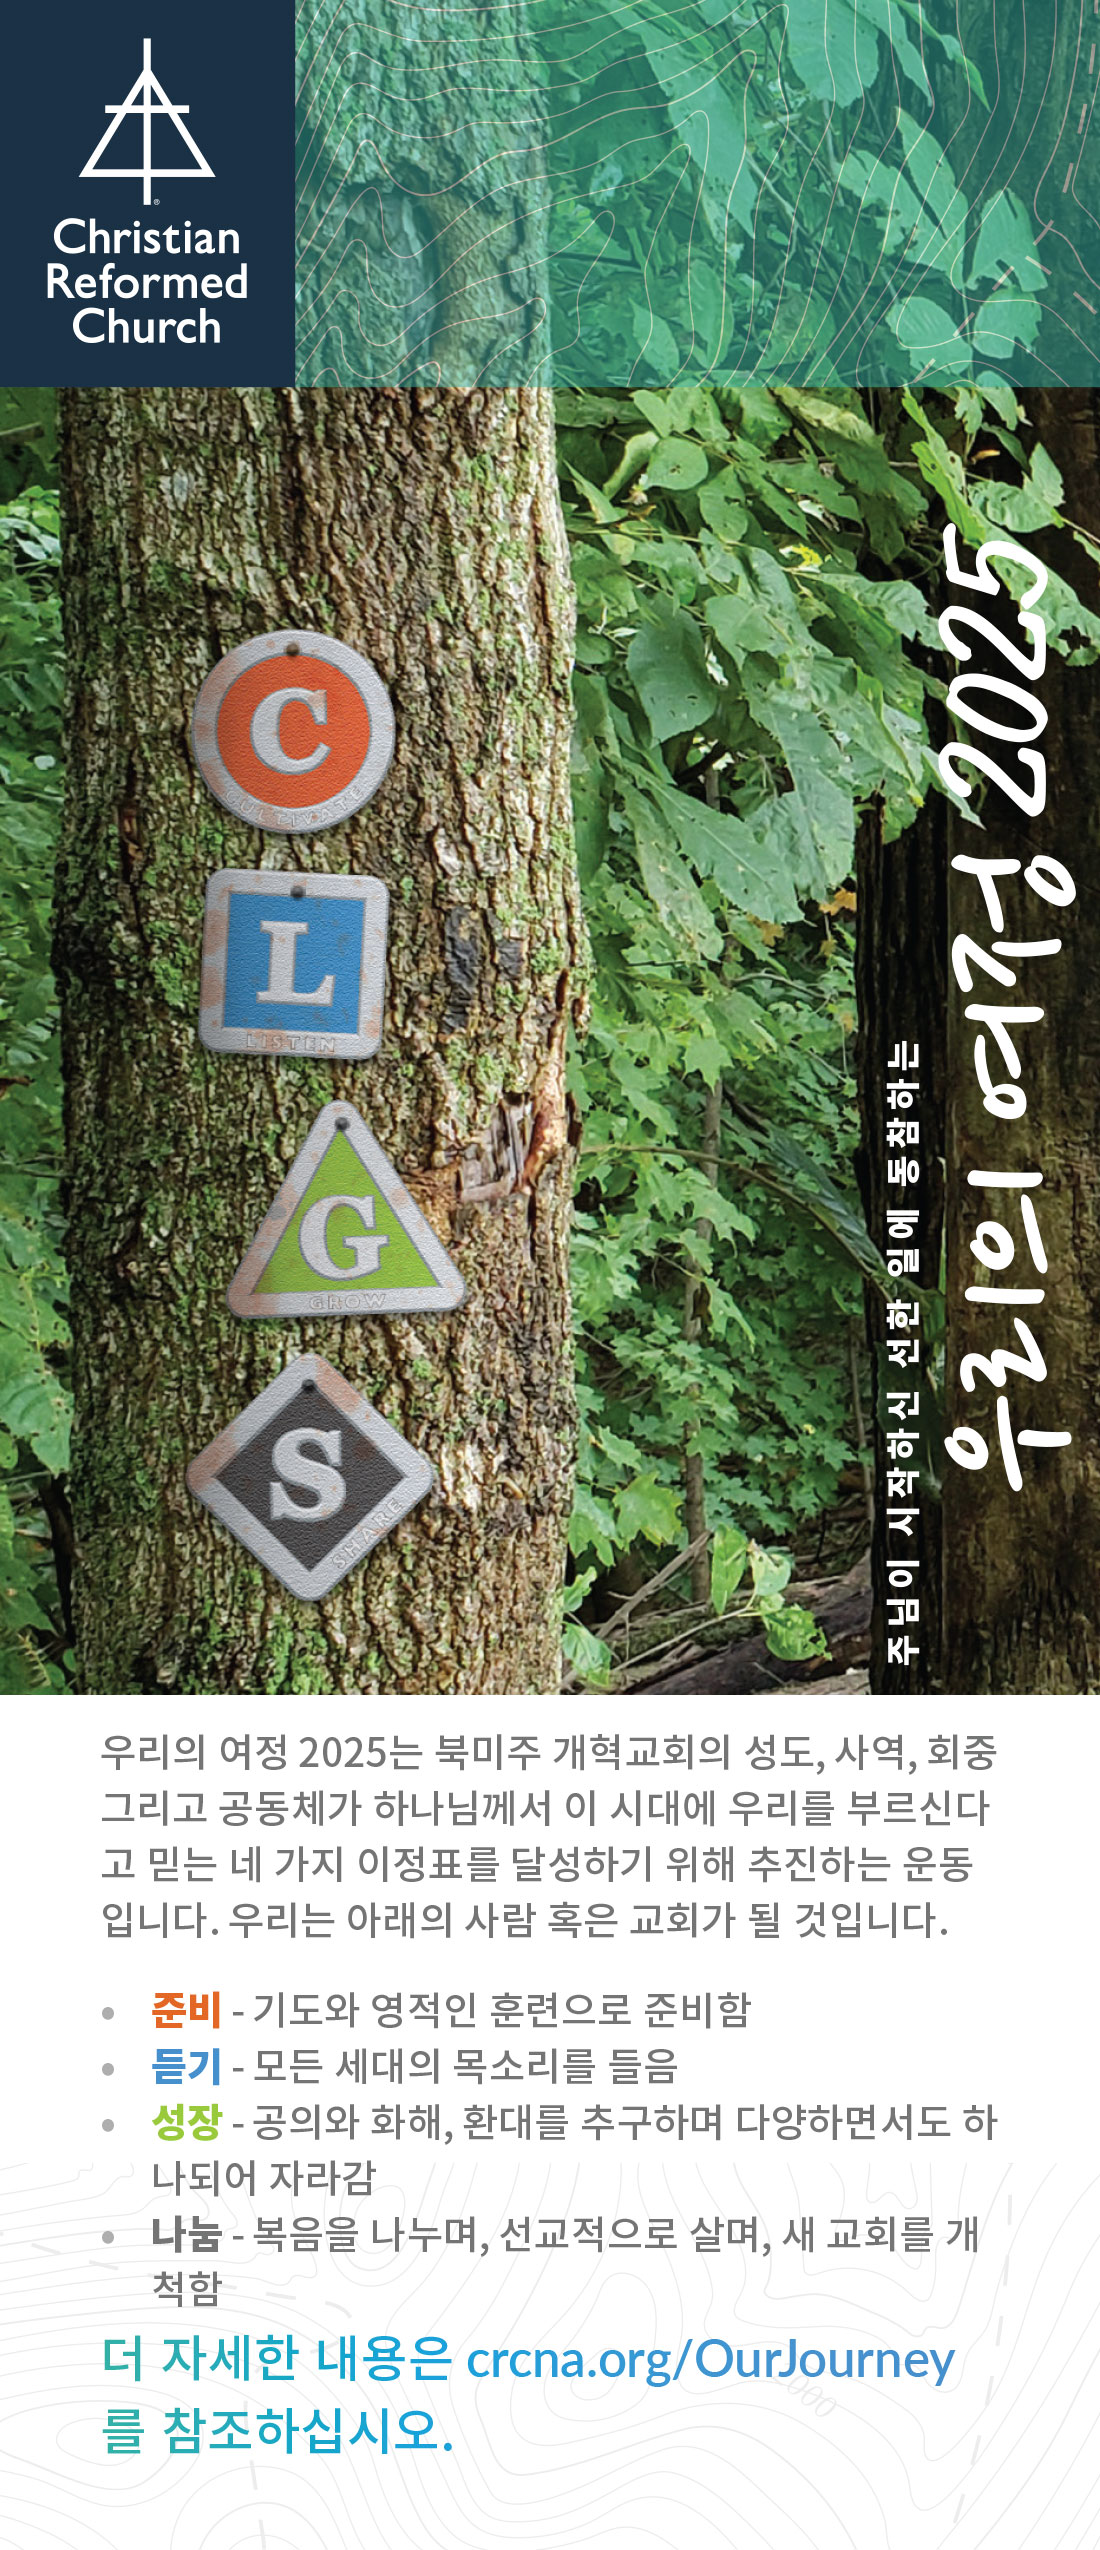 Our Journey 2025 Palm Card (Korean)